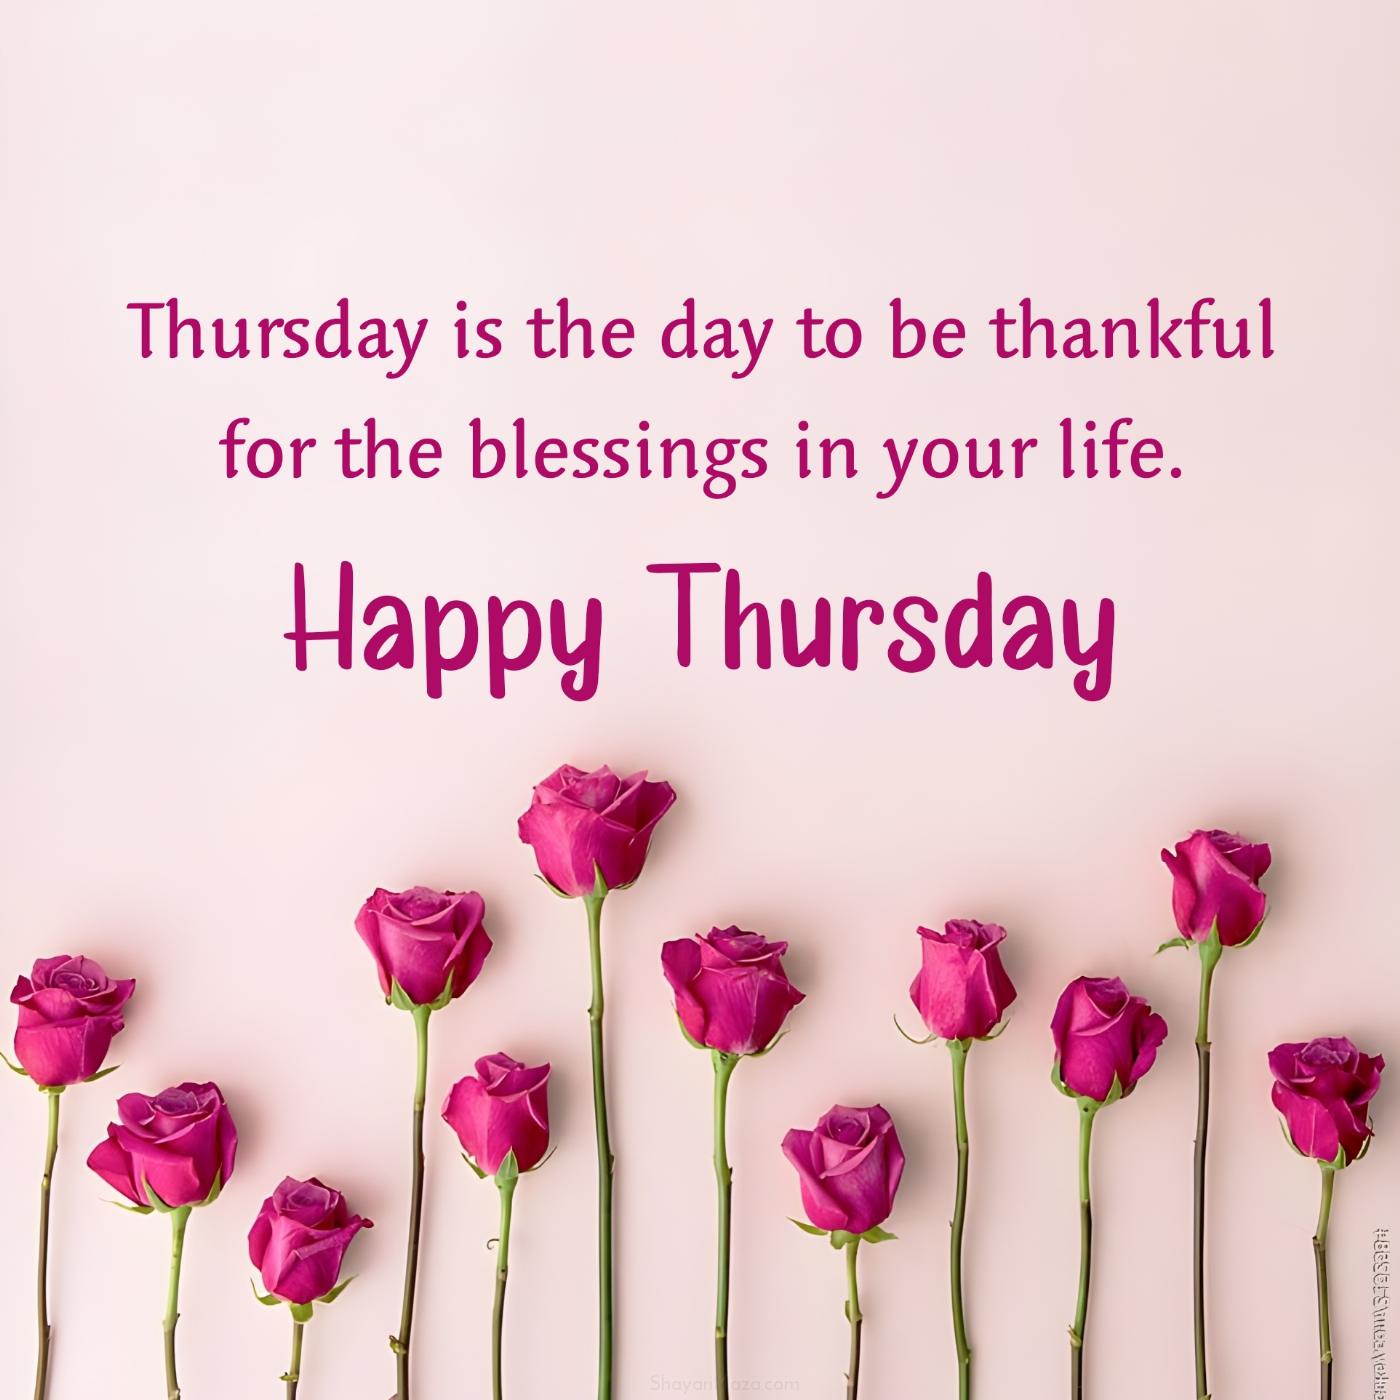 Thursday is the day to be thankful for the blessings